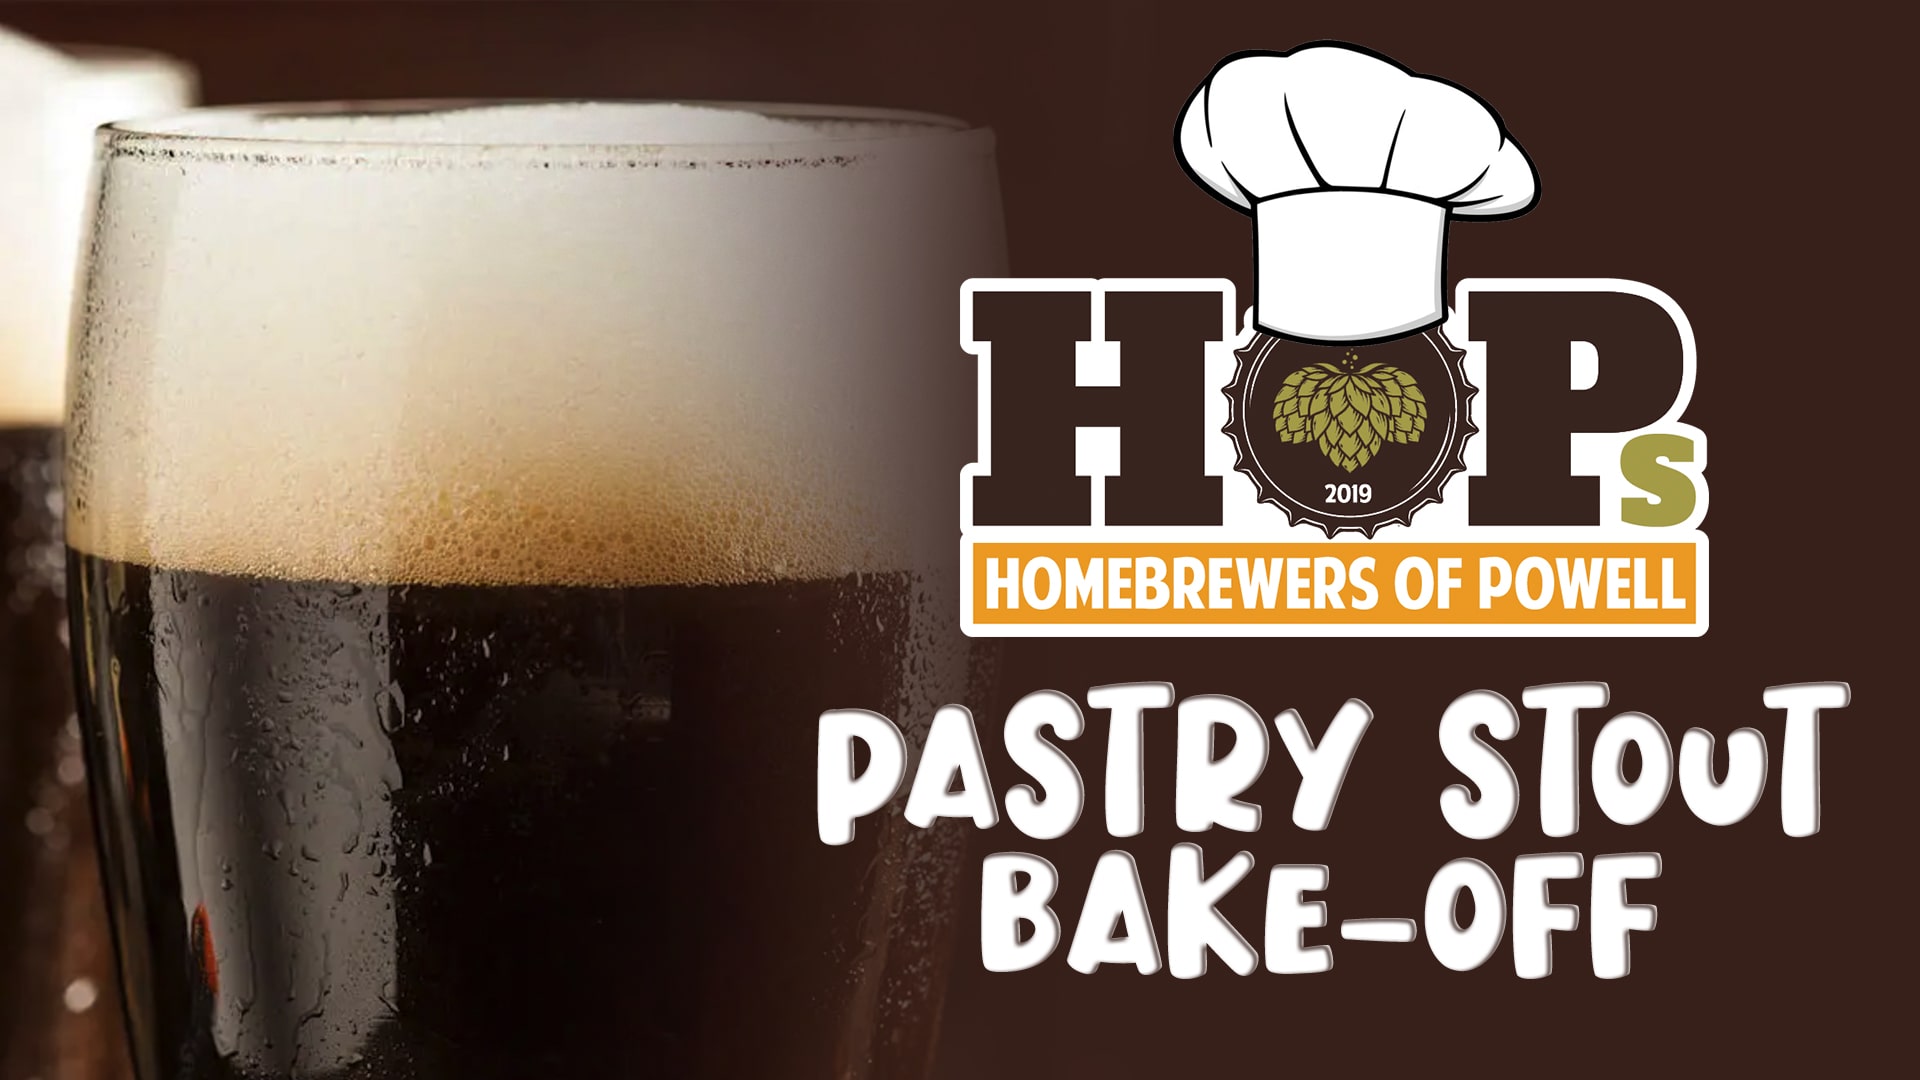 Pastry Stout Bake Off